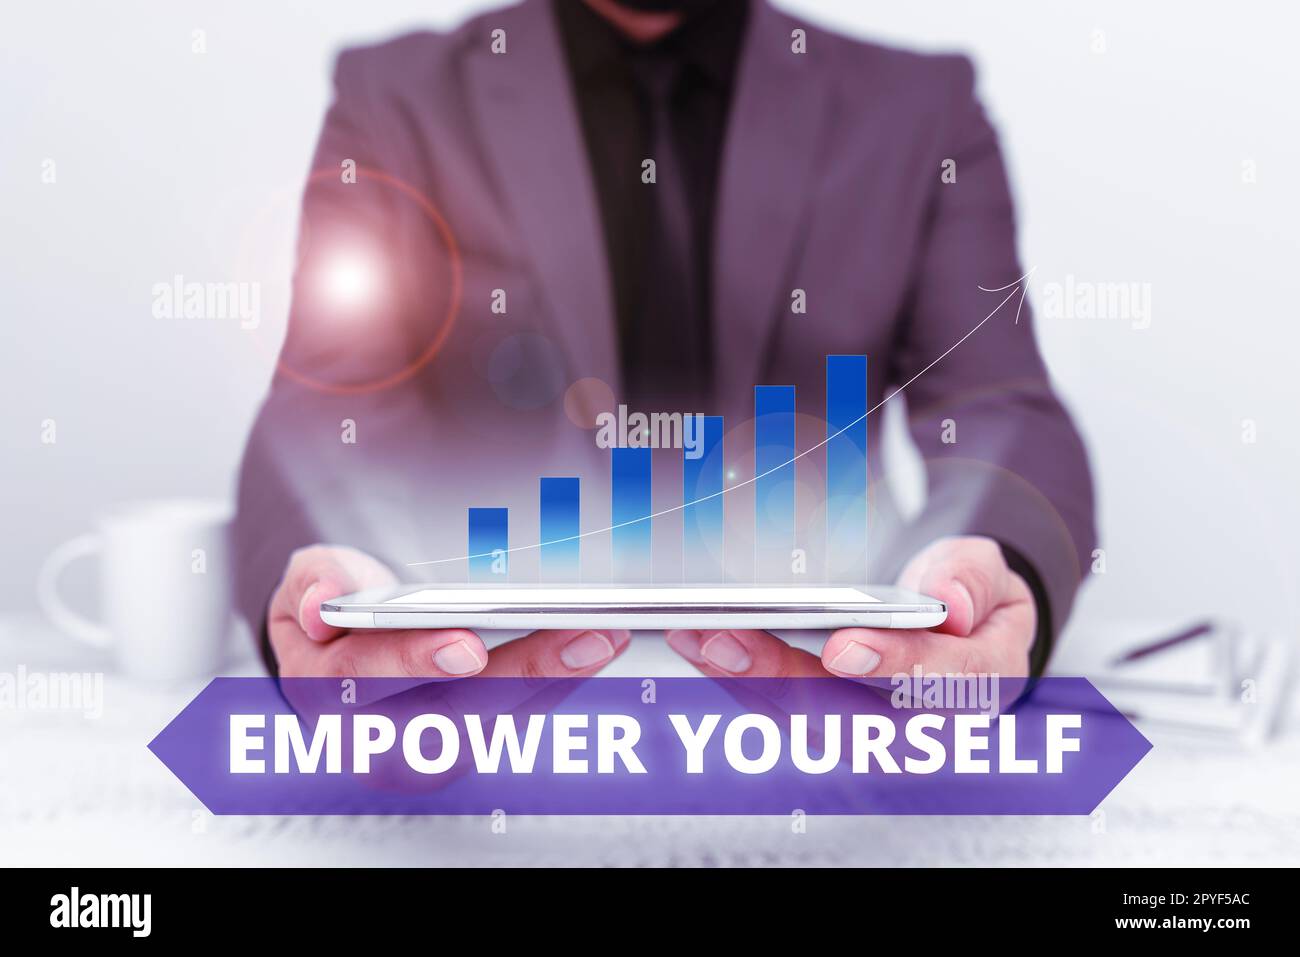 Text sign showing Empower Yourself. Business approach taking control of life setting goals positive choices Stock Photo